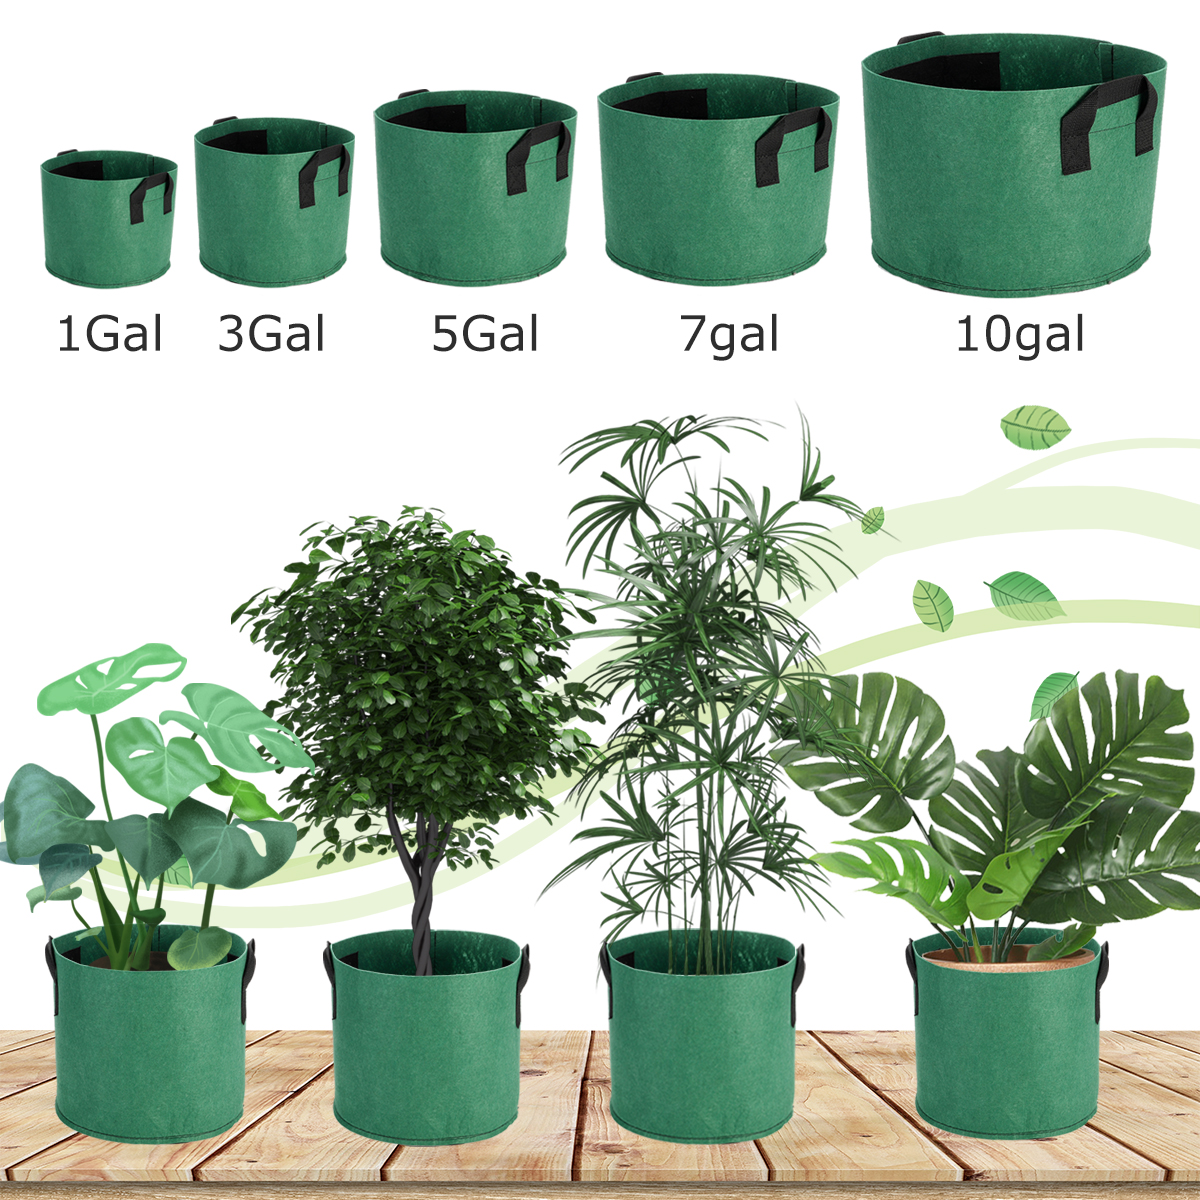 1235710Gallon-Felt-Non-Woven-Pots-Plant-Grow-Bag-Planting-Pouch-Container-Nursery-Seedling-Planting--1543442-1